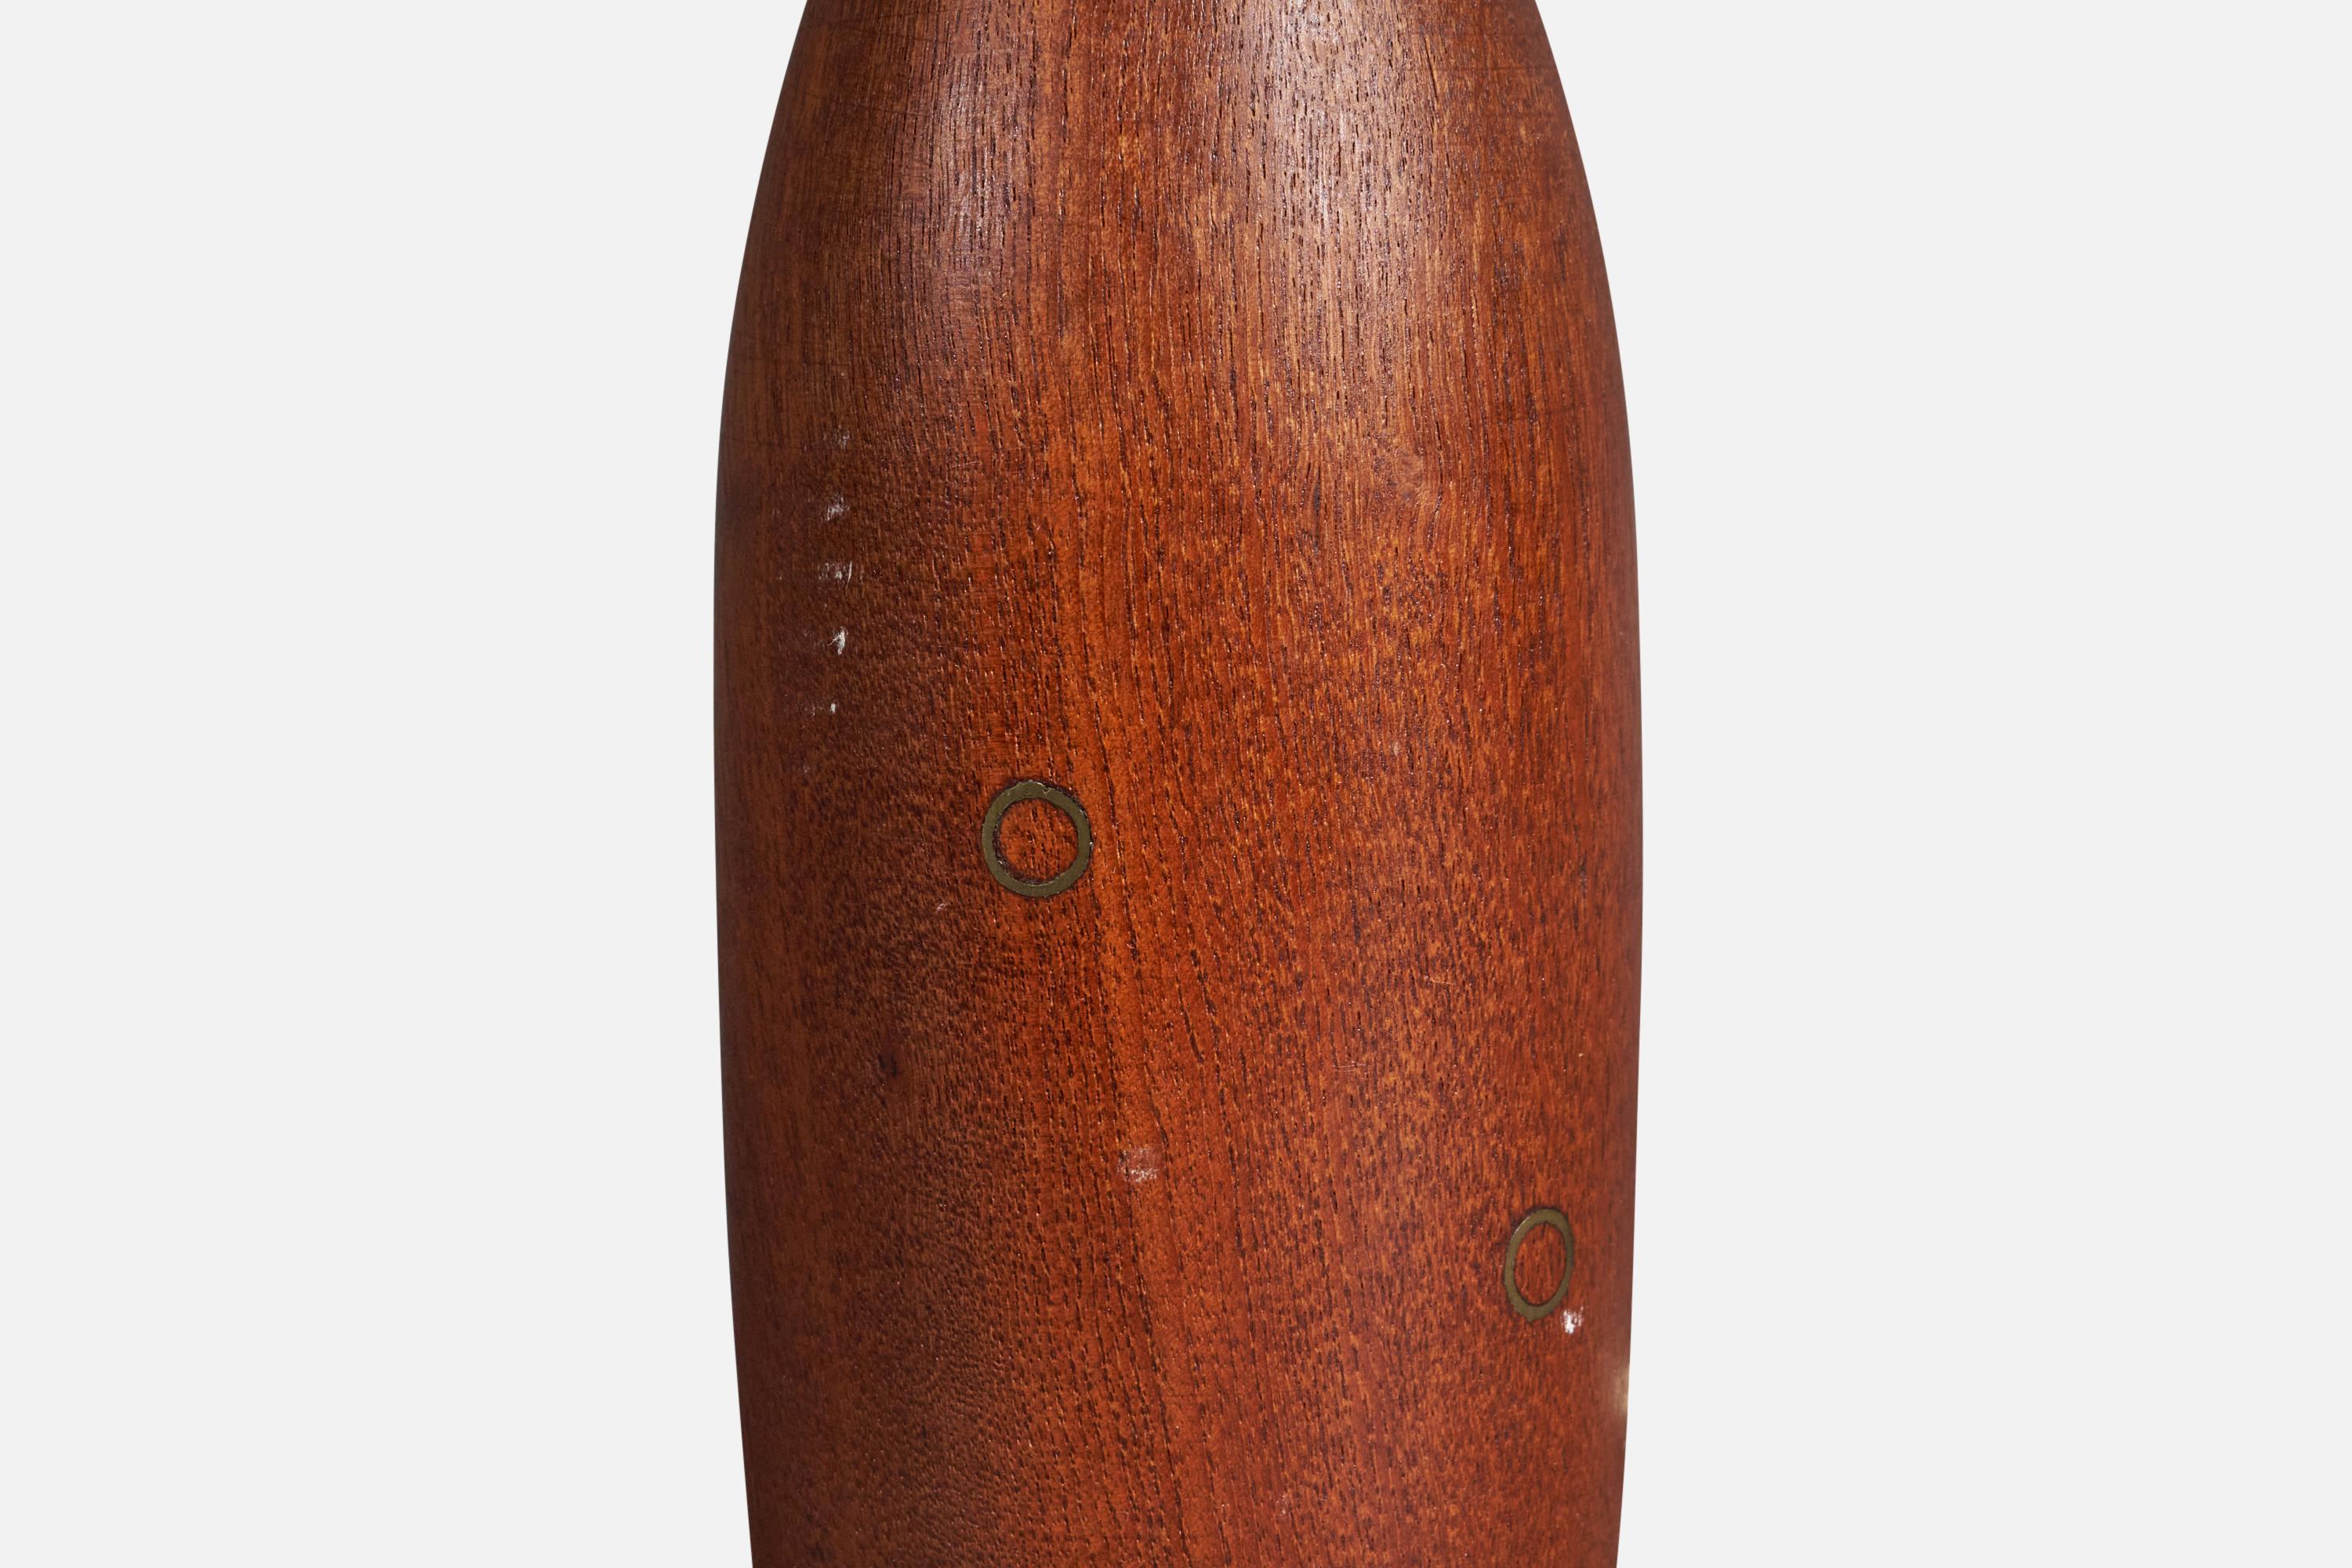 An organic table lamp. In solid teak, with superb brass inlays adding further appeal. 

Sold without lampshade, stated dimensions excluding lampshade.

Other designers of the period include Finn Juhl, Hans Wegner, Kaare Klint, Alvar Aalto, and